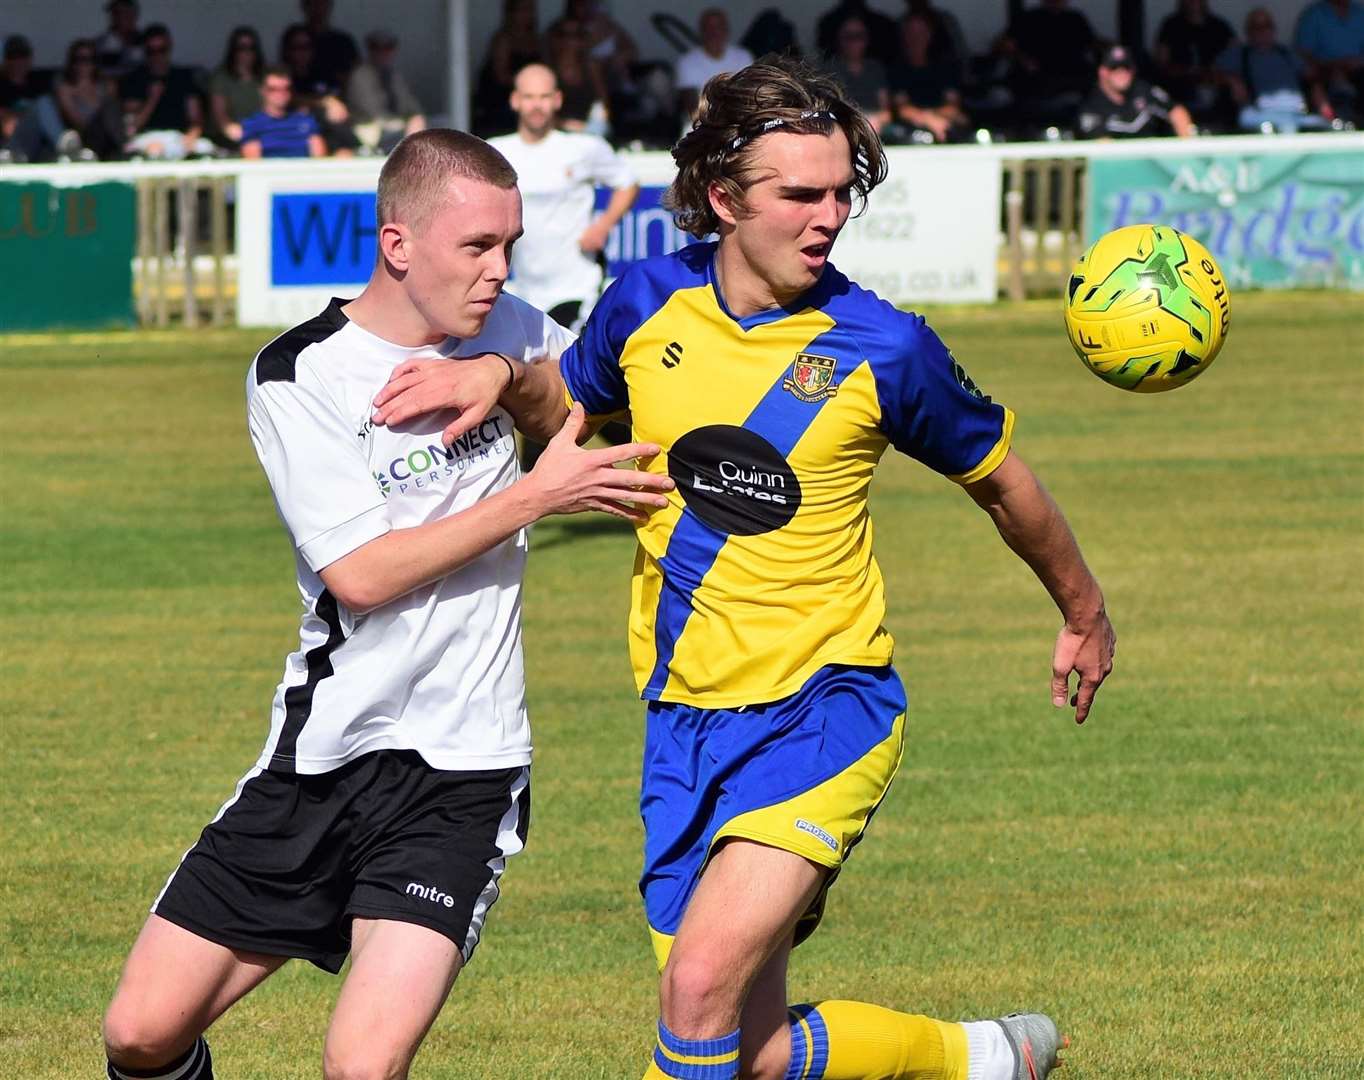 Roman Campbell's loan finished after Saturday's game at Faversham Picture: Ken Medwyn